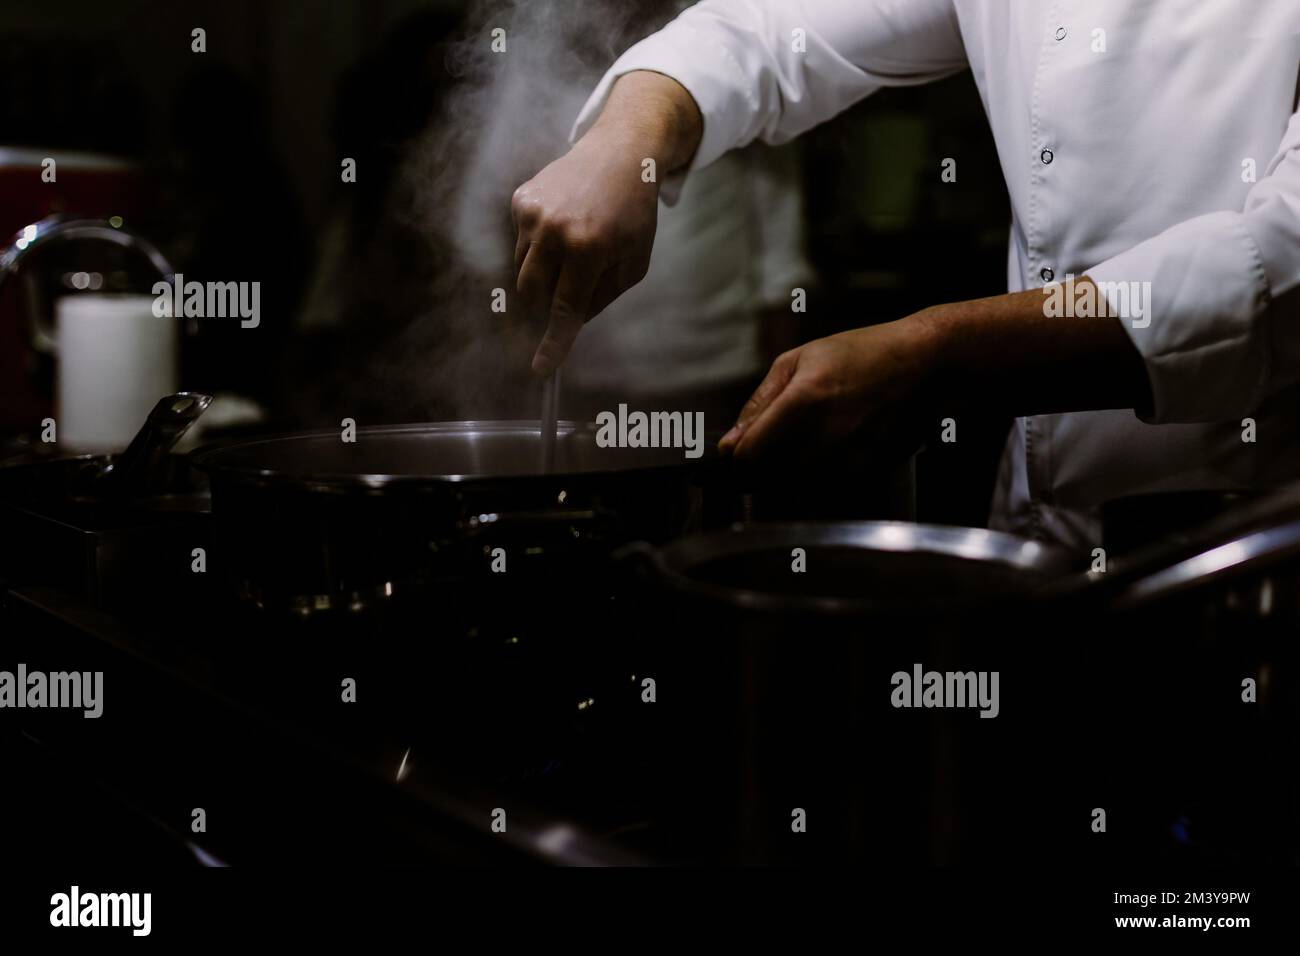 A cook stirring pots in the kitchen. Big pots in the kitchen. gastronomy education Stock Photo